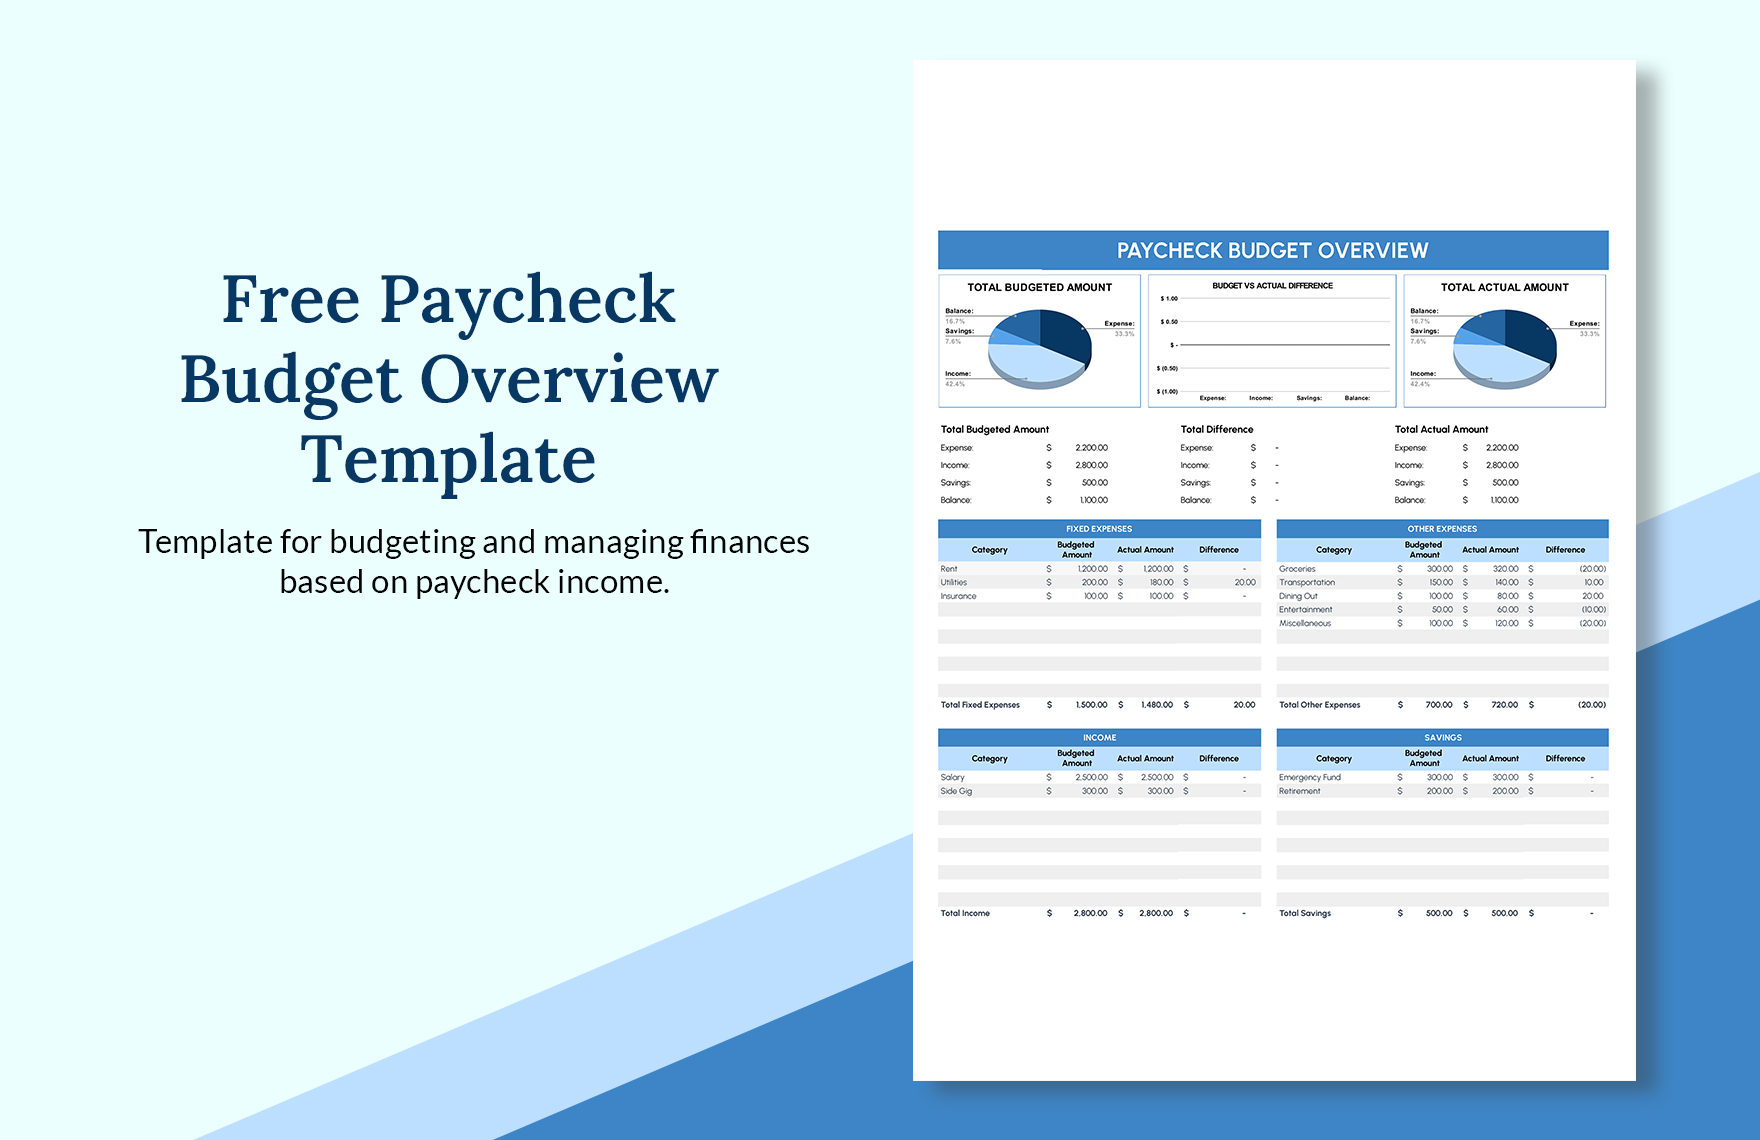 Free Paycheck Budget Overview Template